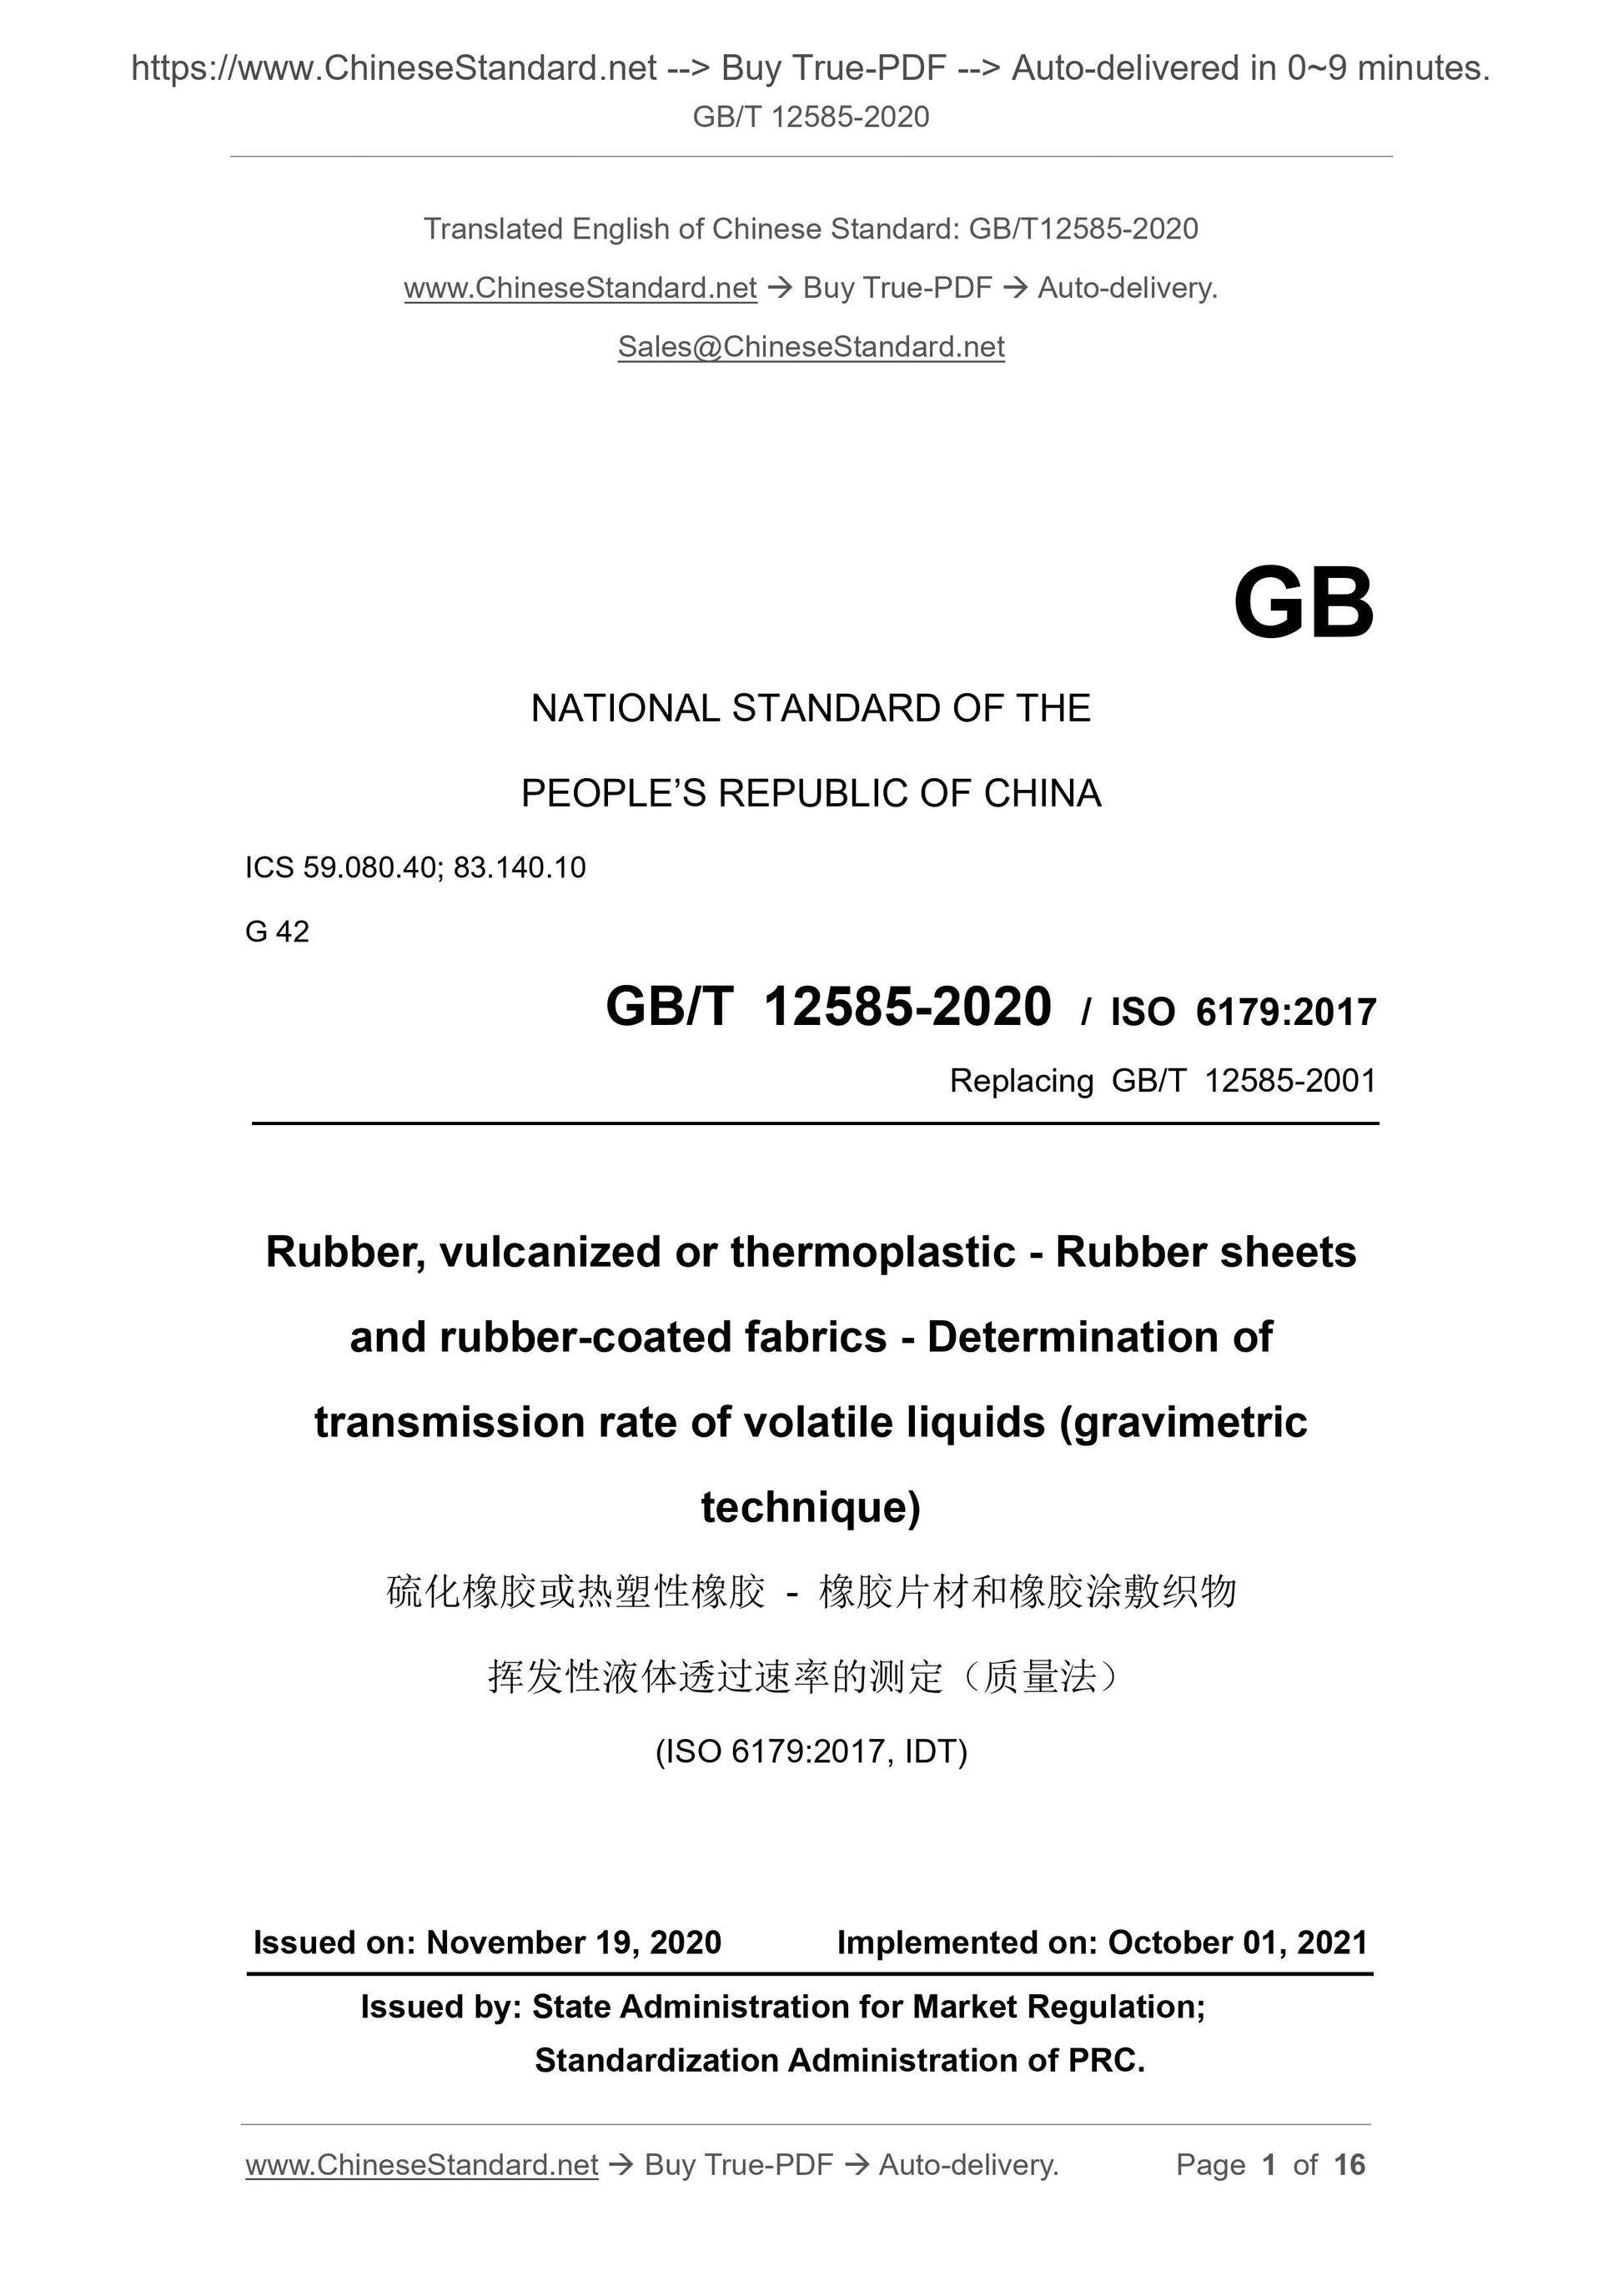 GB/T 12585-2020 Page 1